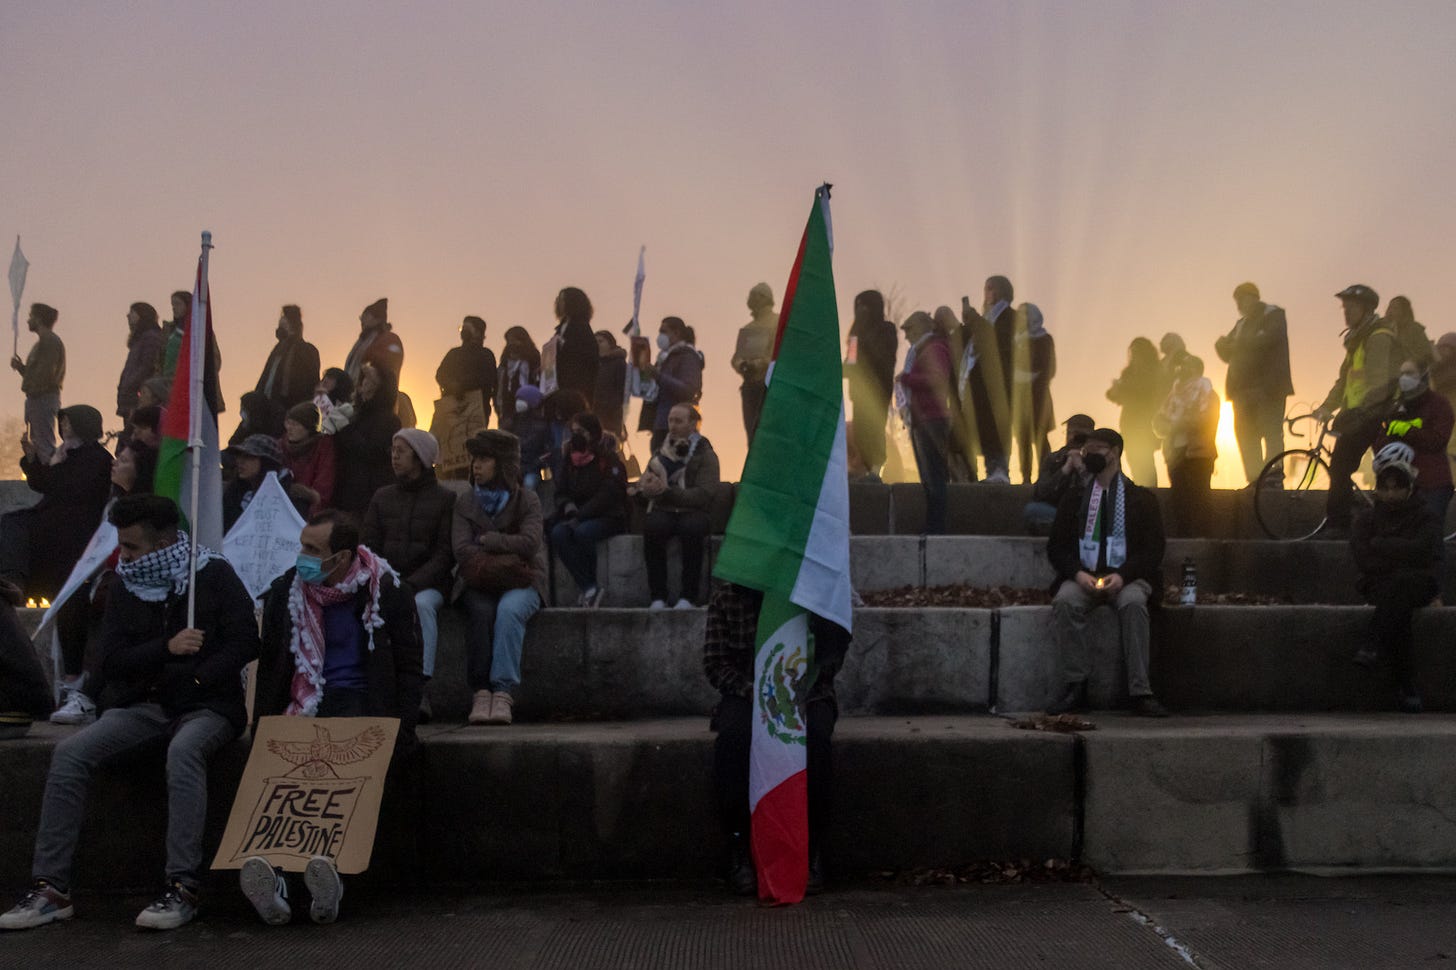 The sun sets behind Palestinian solidarity protesters at Chicago's lakefront.